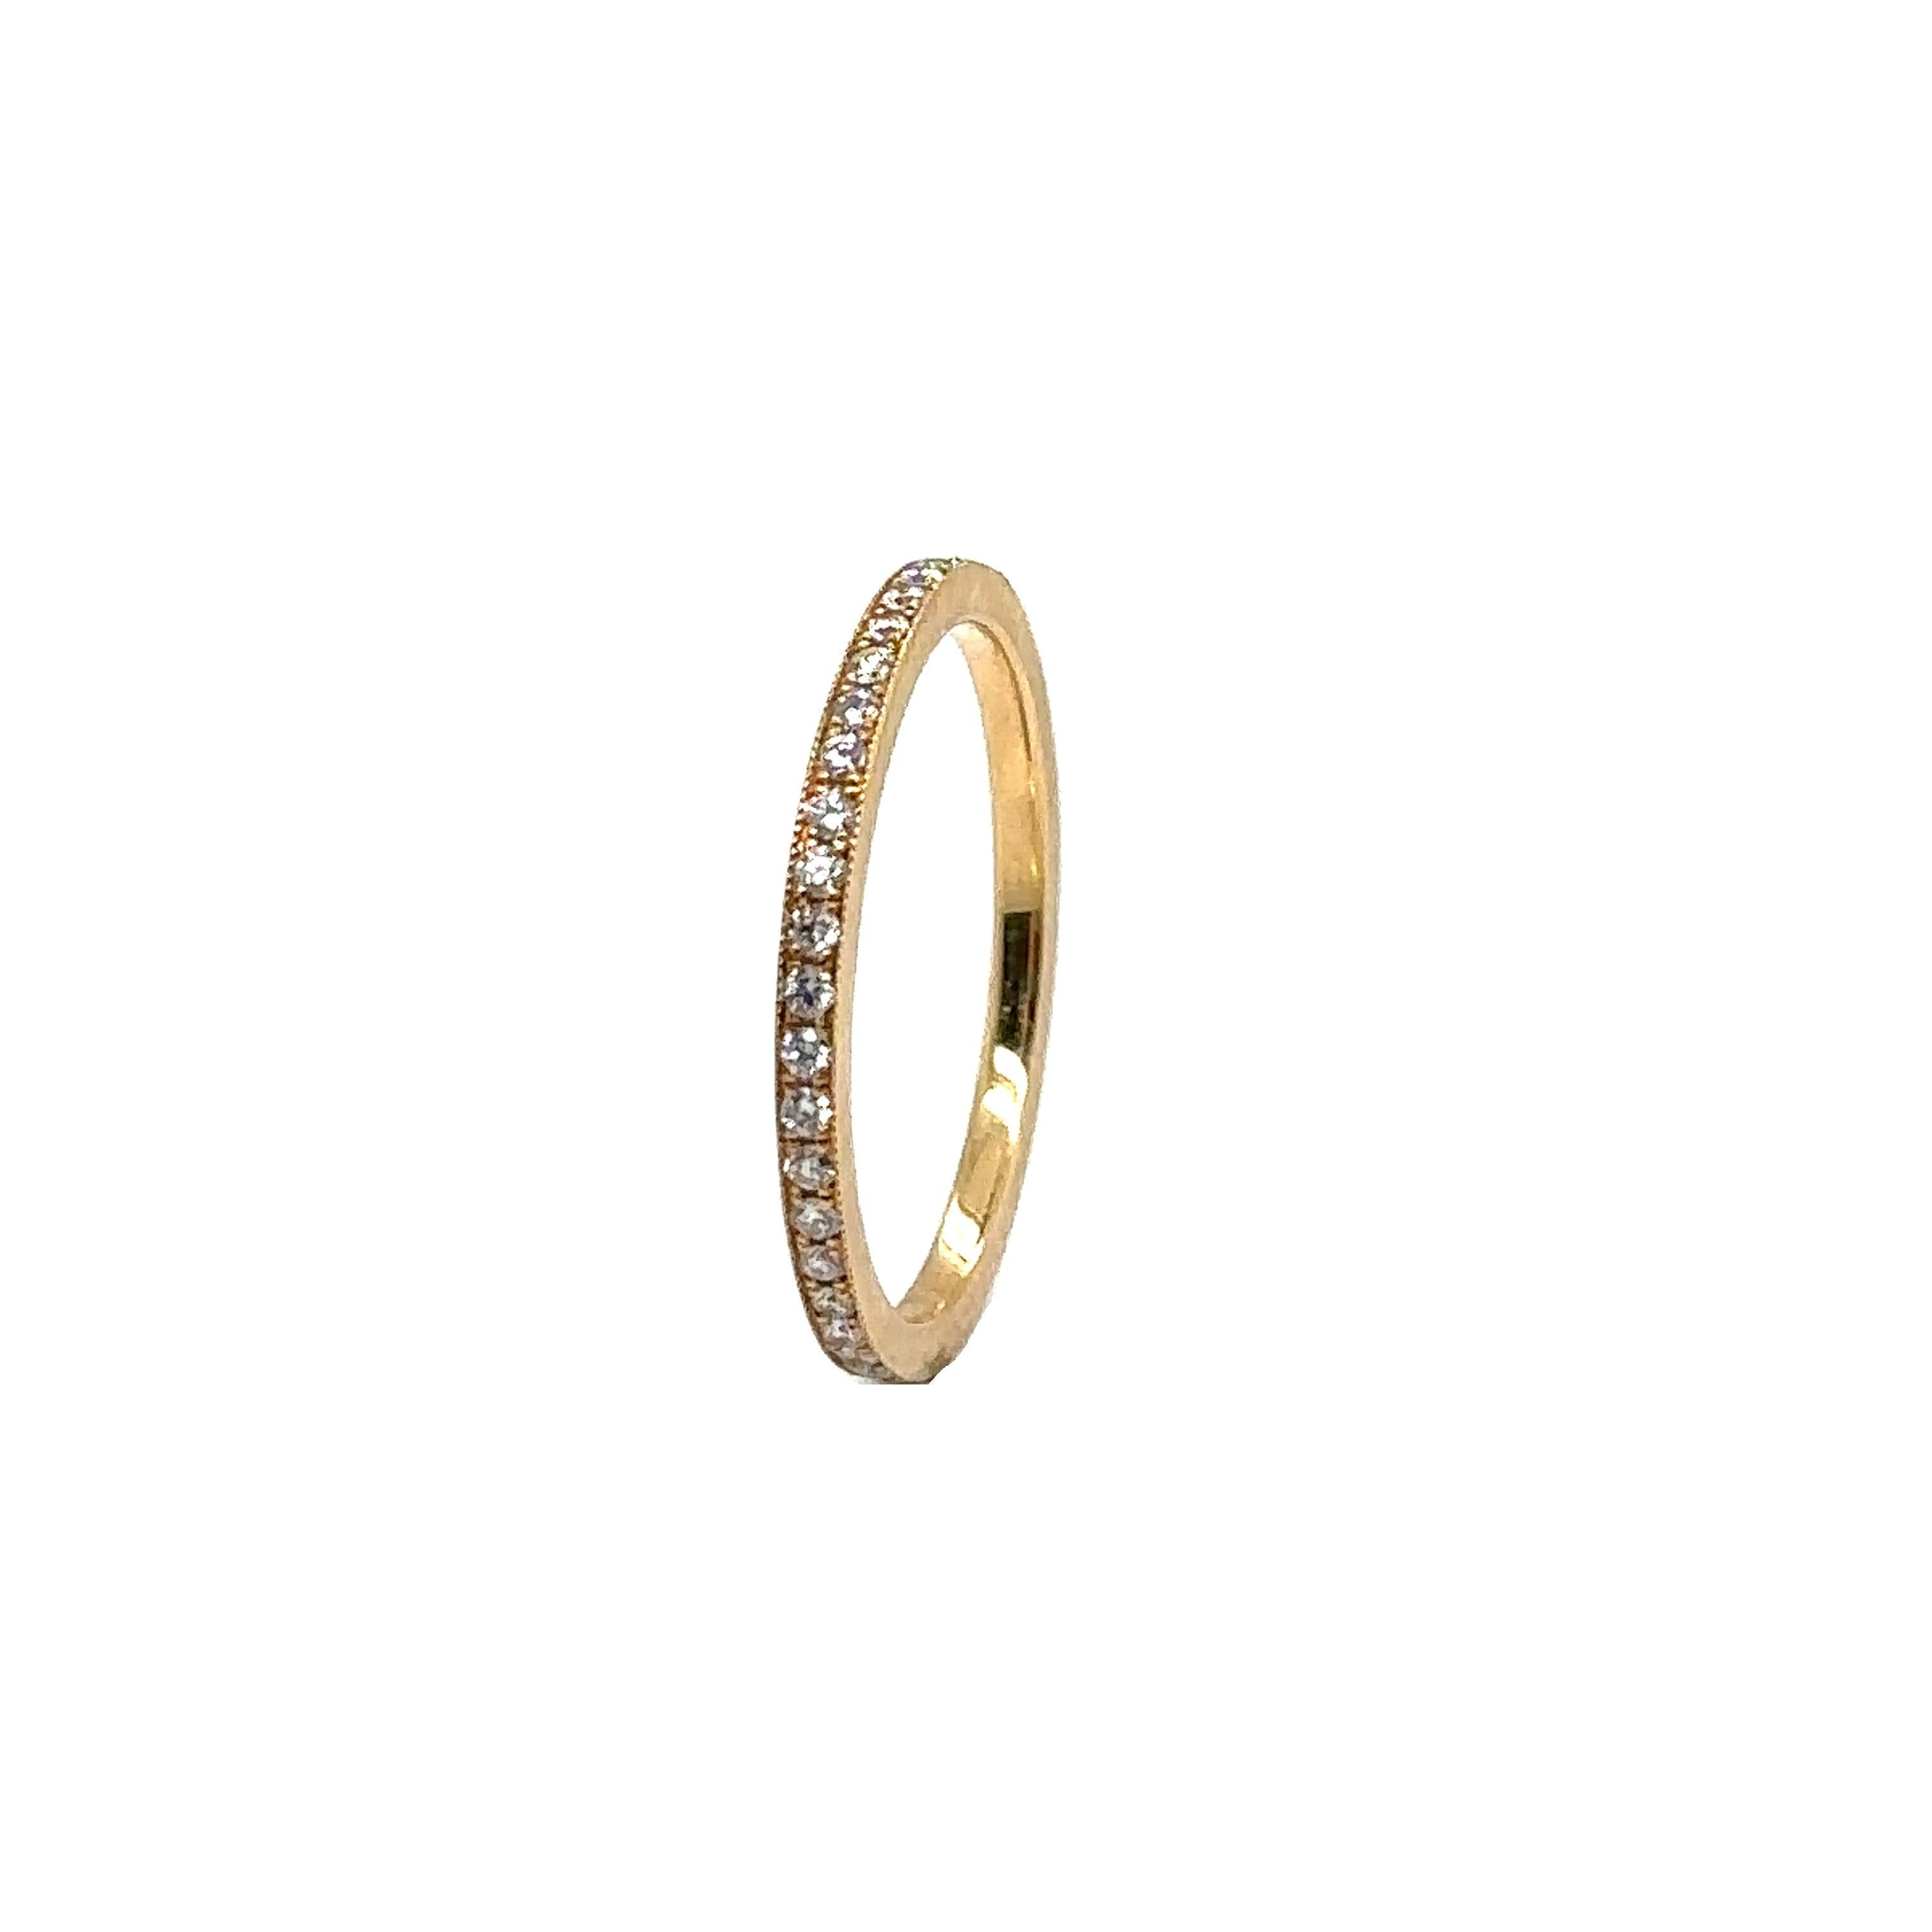 18K YELLOW GOLD WEDDING BAND with DIAMONDS
Metal: 18K Yellow Gold
Diamond Info: 
43 - G/VS ROUND BRILLIANT DIAMONDS
SETTING MICRO PAVE BRIGHT CUT WITH MILLI GRAIN 
Total Ct Weight:  0.33 cwt.
Item Weight: 1.59 gm
Ring Size: 6 ¼ plus (Can be sized up